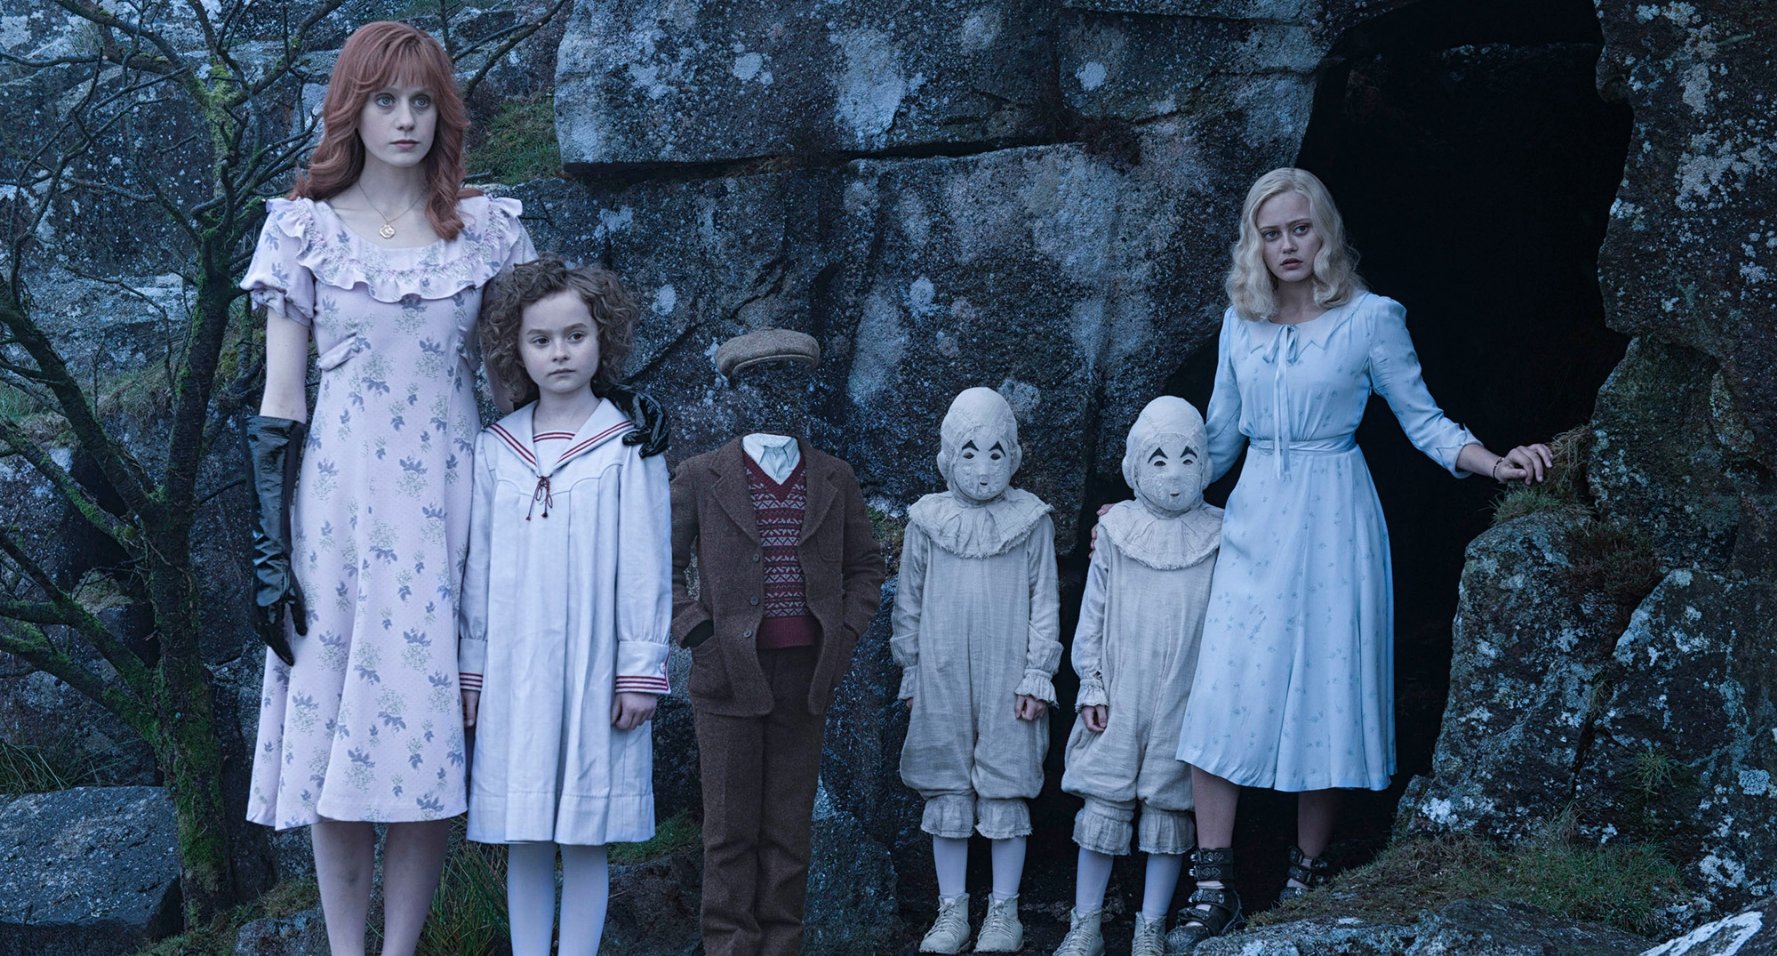 miss-peregrines-home-for-peculiar-children-2016